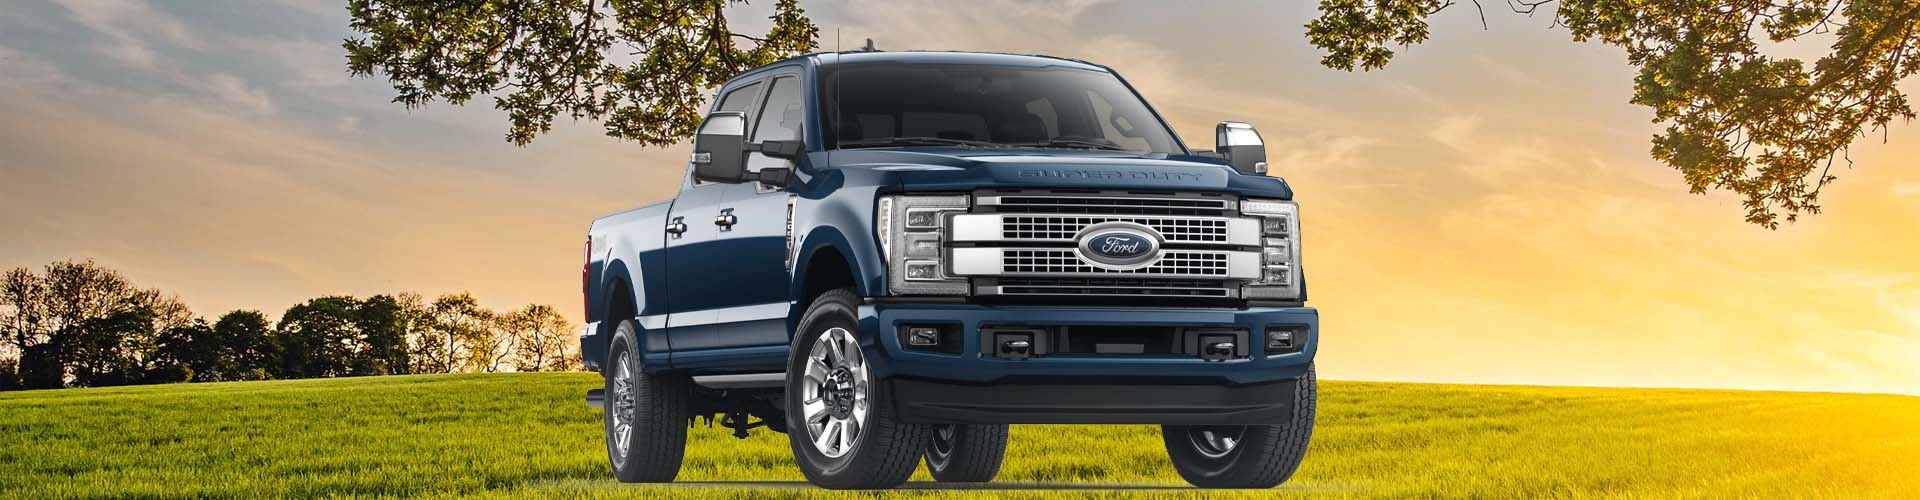 2019 Ford Super Duty F 250 Platinum Rtown Ford Ford Dealer